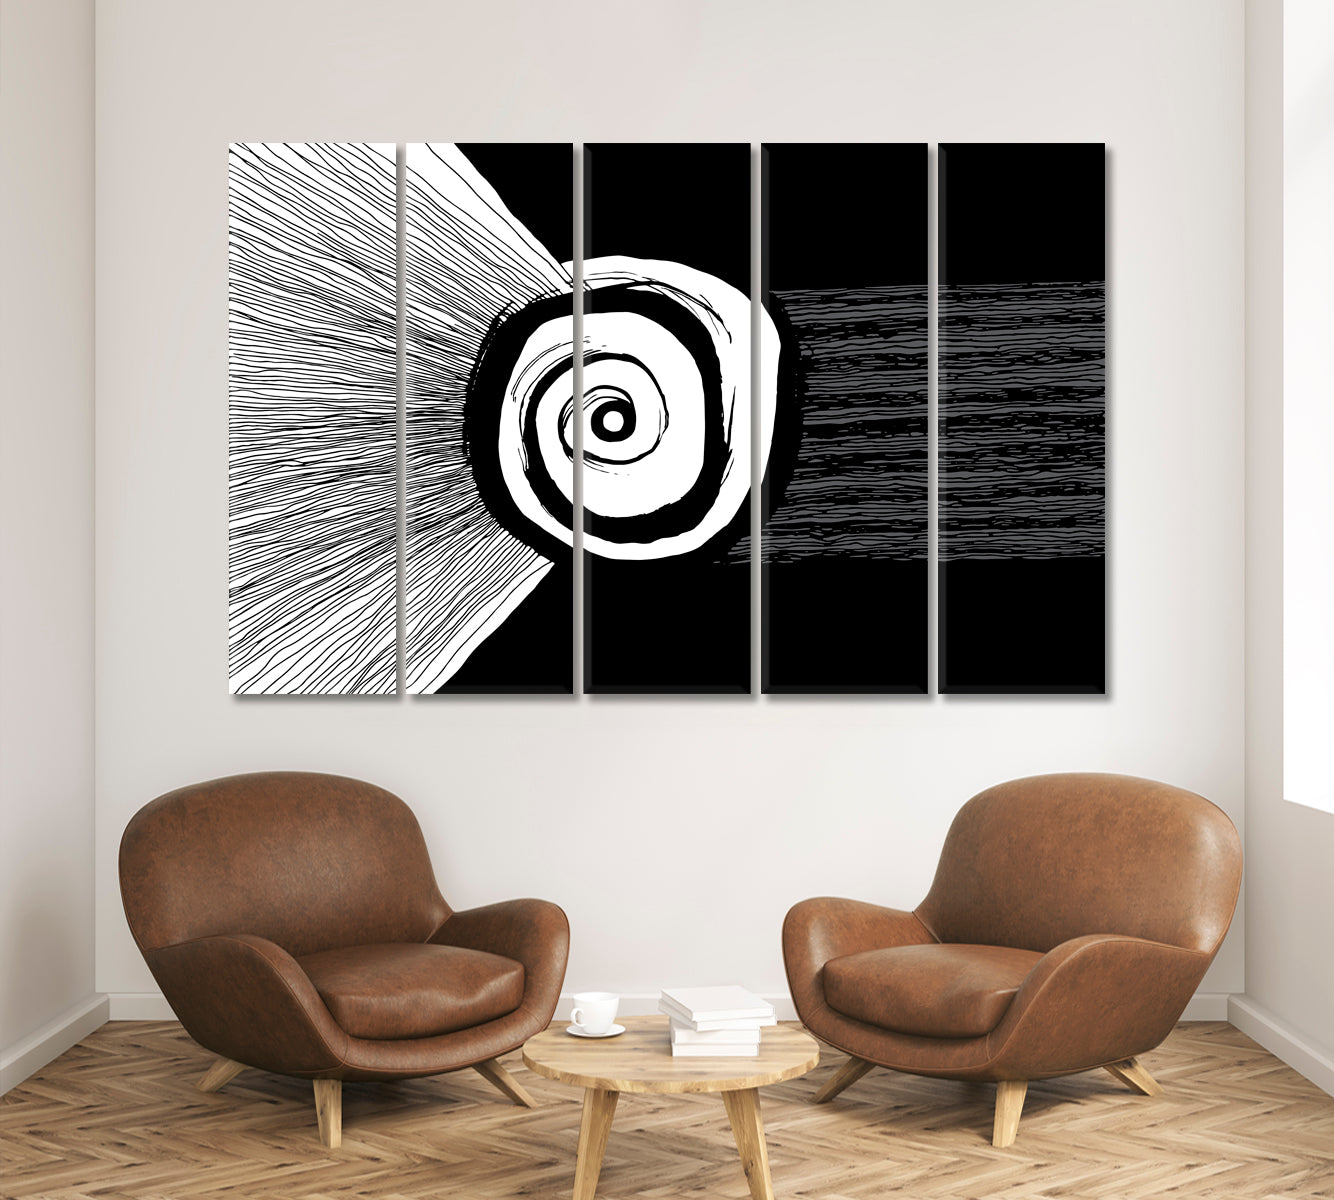 BLACK AND WHITE Geometric Modern Abstract Art Contemporary Art Artesty 5 panels 36" x 24" 